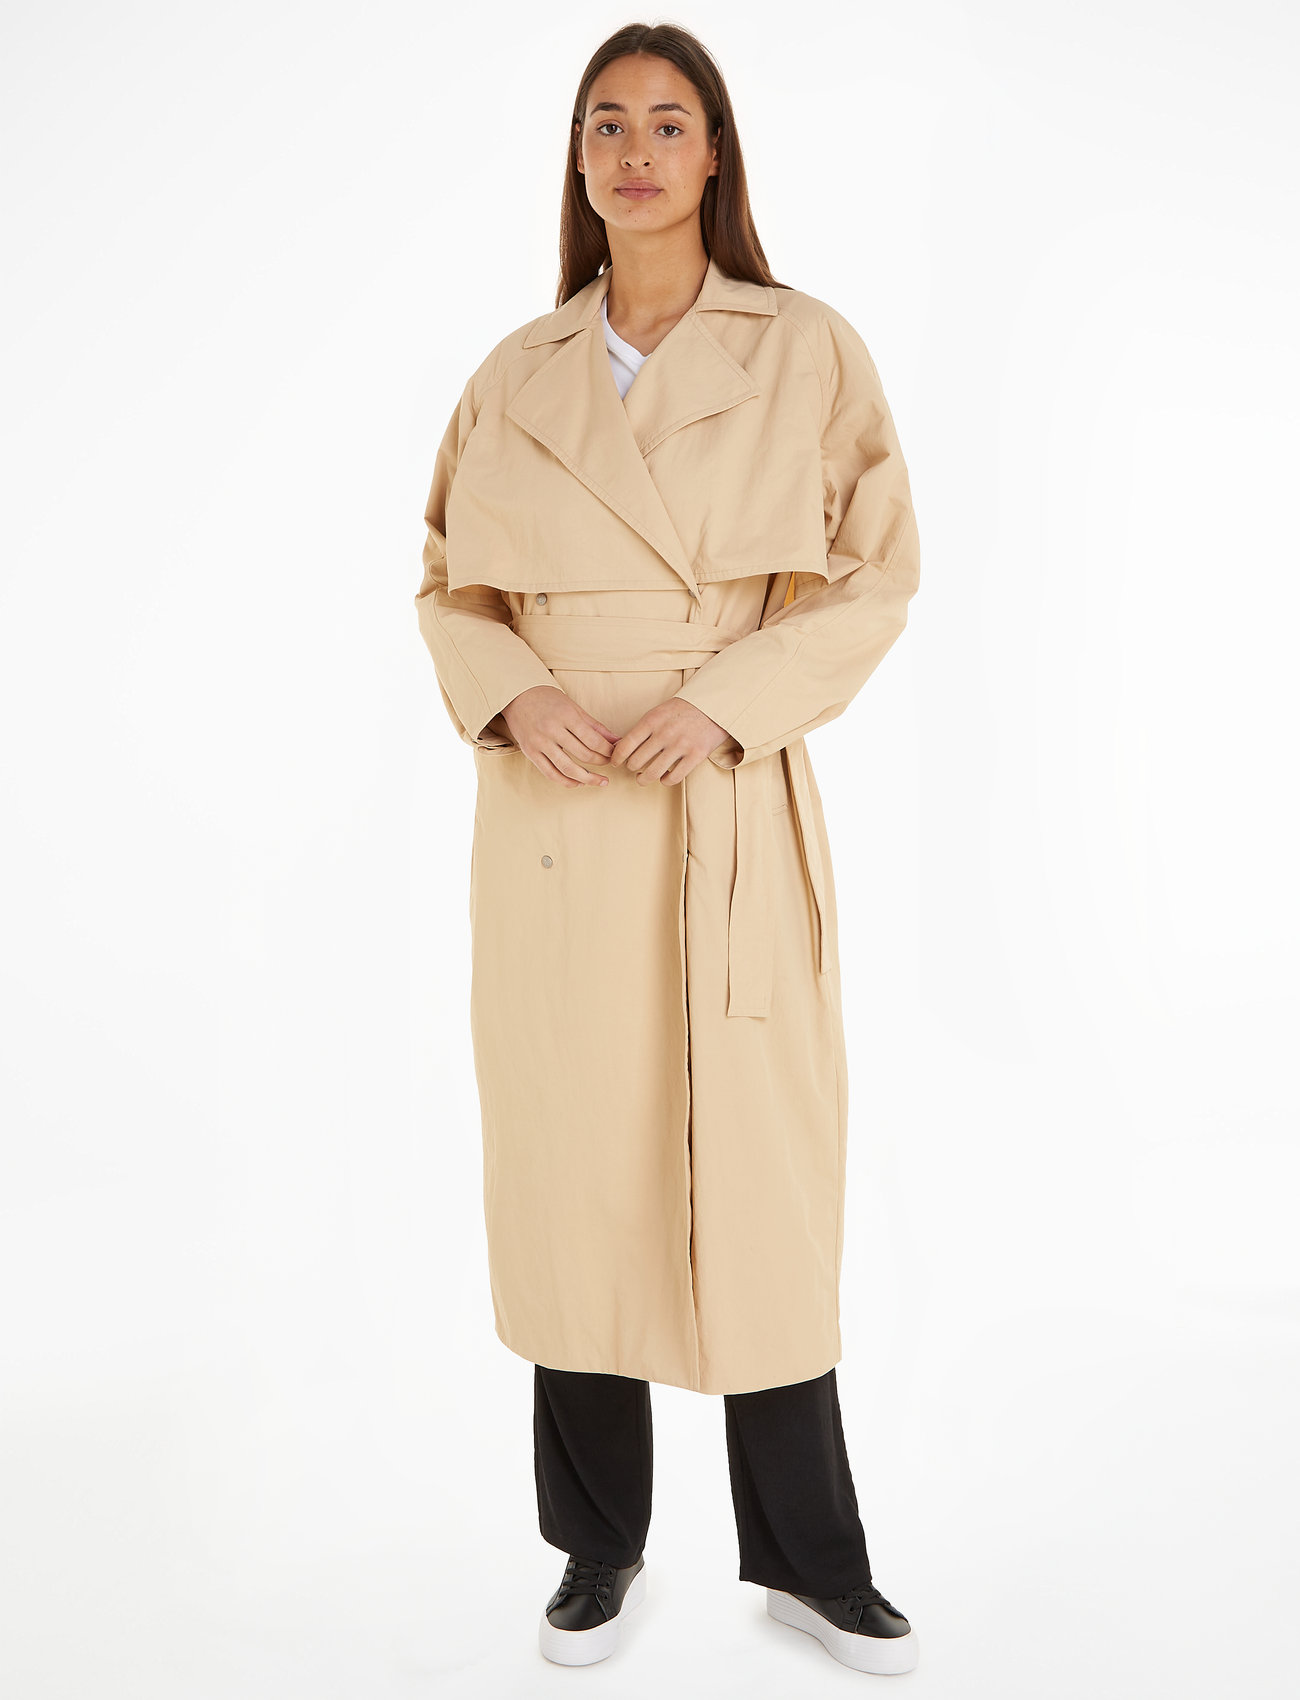 Calvin Klein Jeans Belted Trench Coat from easy Calvin Klein €. Fast at returns Buy - coats Trench online and delivery Jeans 212.42 Boozt.com